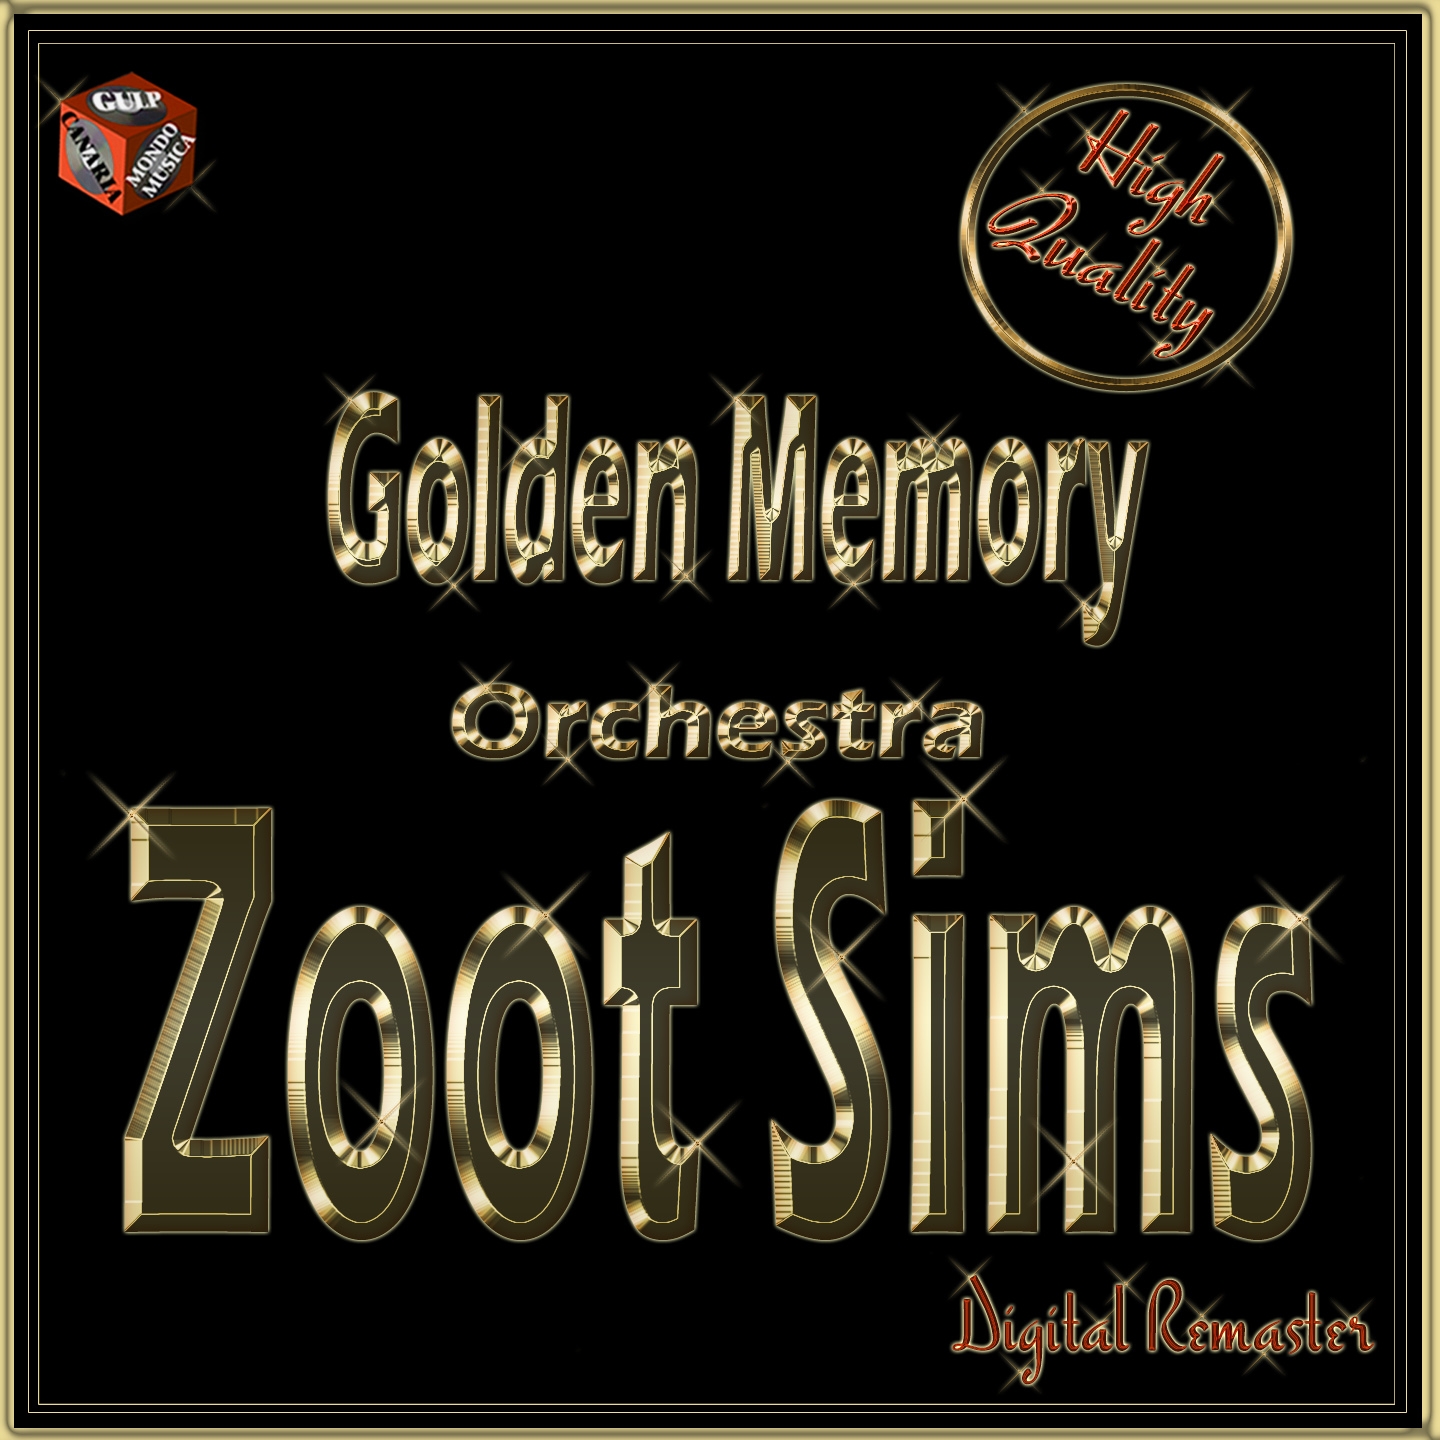 Zoot Swings the Blues (Second Version)